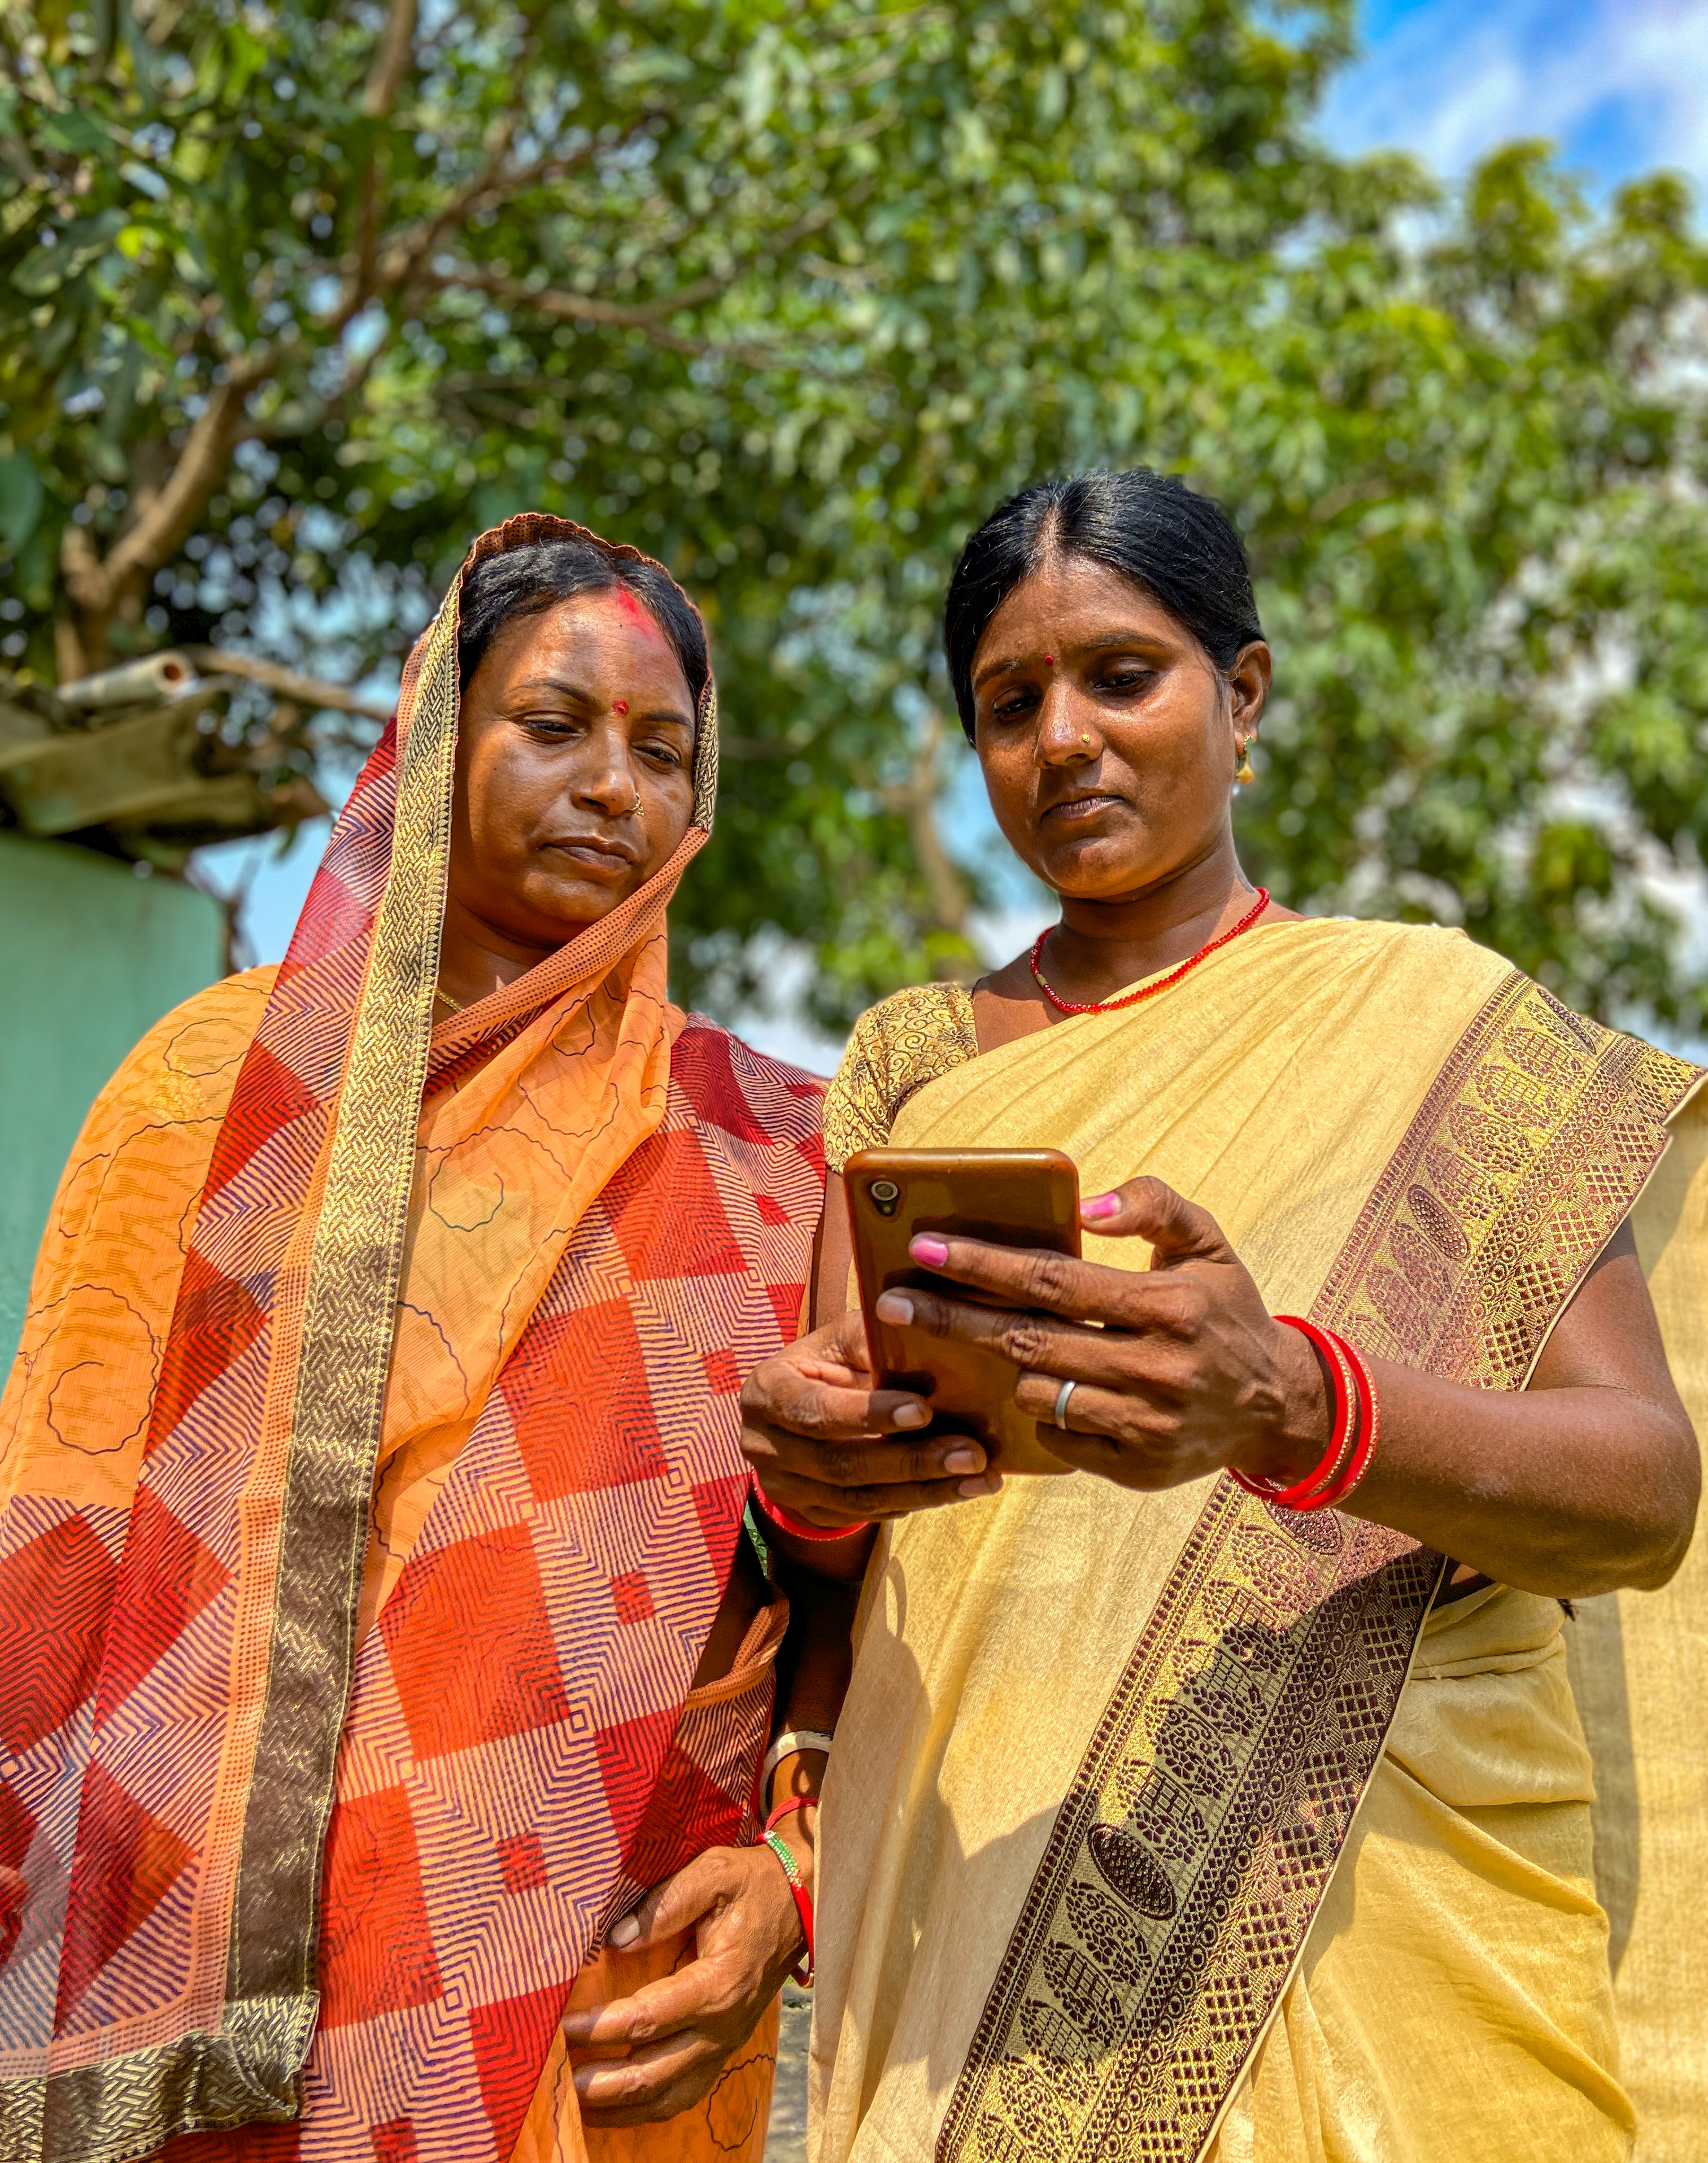 Two women from rural India looking at the smartphone one of them is holding. 